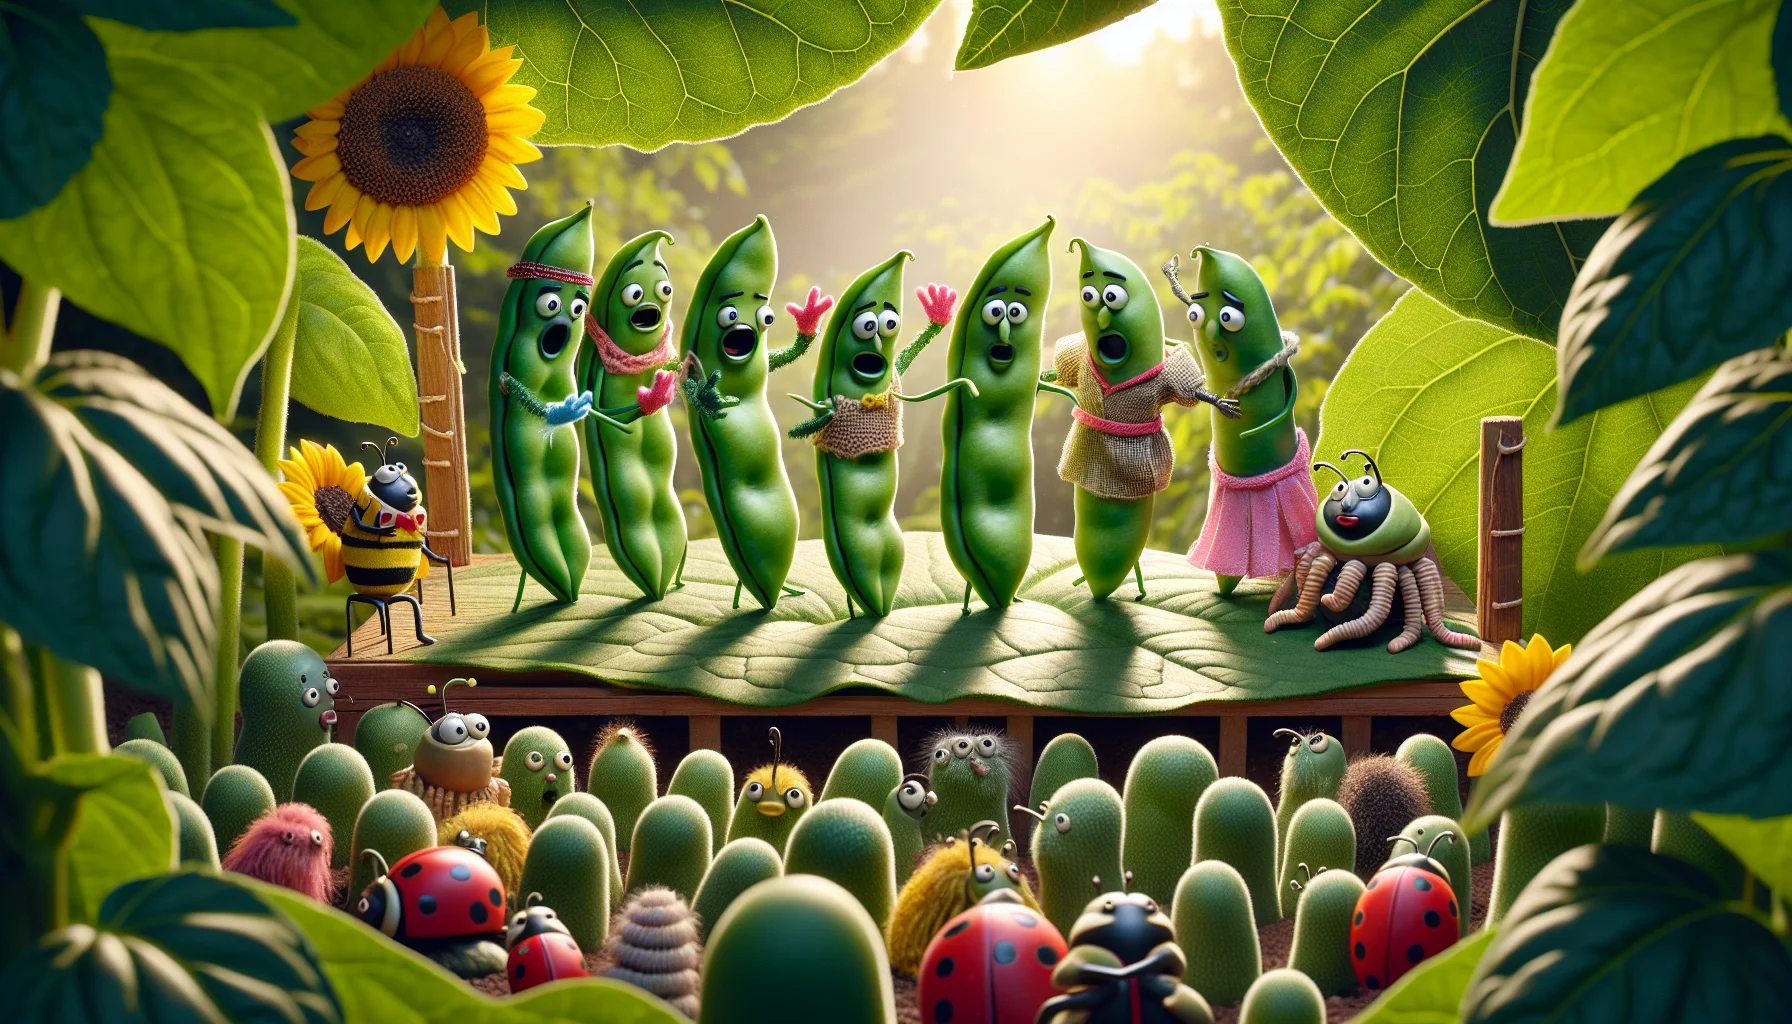 Create a detailed and realistic scene where an animated group of raw green beans are putting on a theatrical play in a lush garden. The beans are anthropomorphized and exhibit expressions of joy and excitement. They don vibrant costumes, are standing on a leaf-stage under a sunflower umbrella. A mixed group of garden creatures like bees, ladybugs, and worms, who are portraited in a non-frightening way, are watching the performance, mesmerized. The mood is light, the colors are bright, making the spectacle even more enticing. The scene captures the fun and joy associated with gardening while prompting a chuckle.